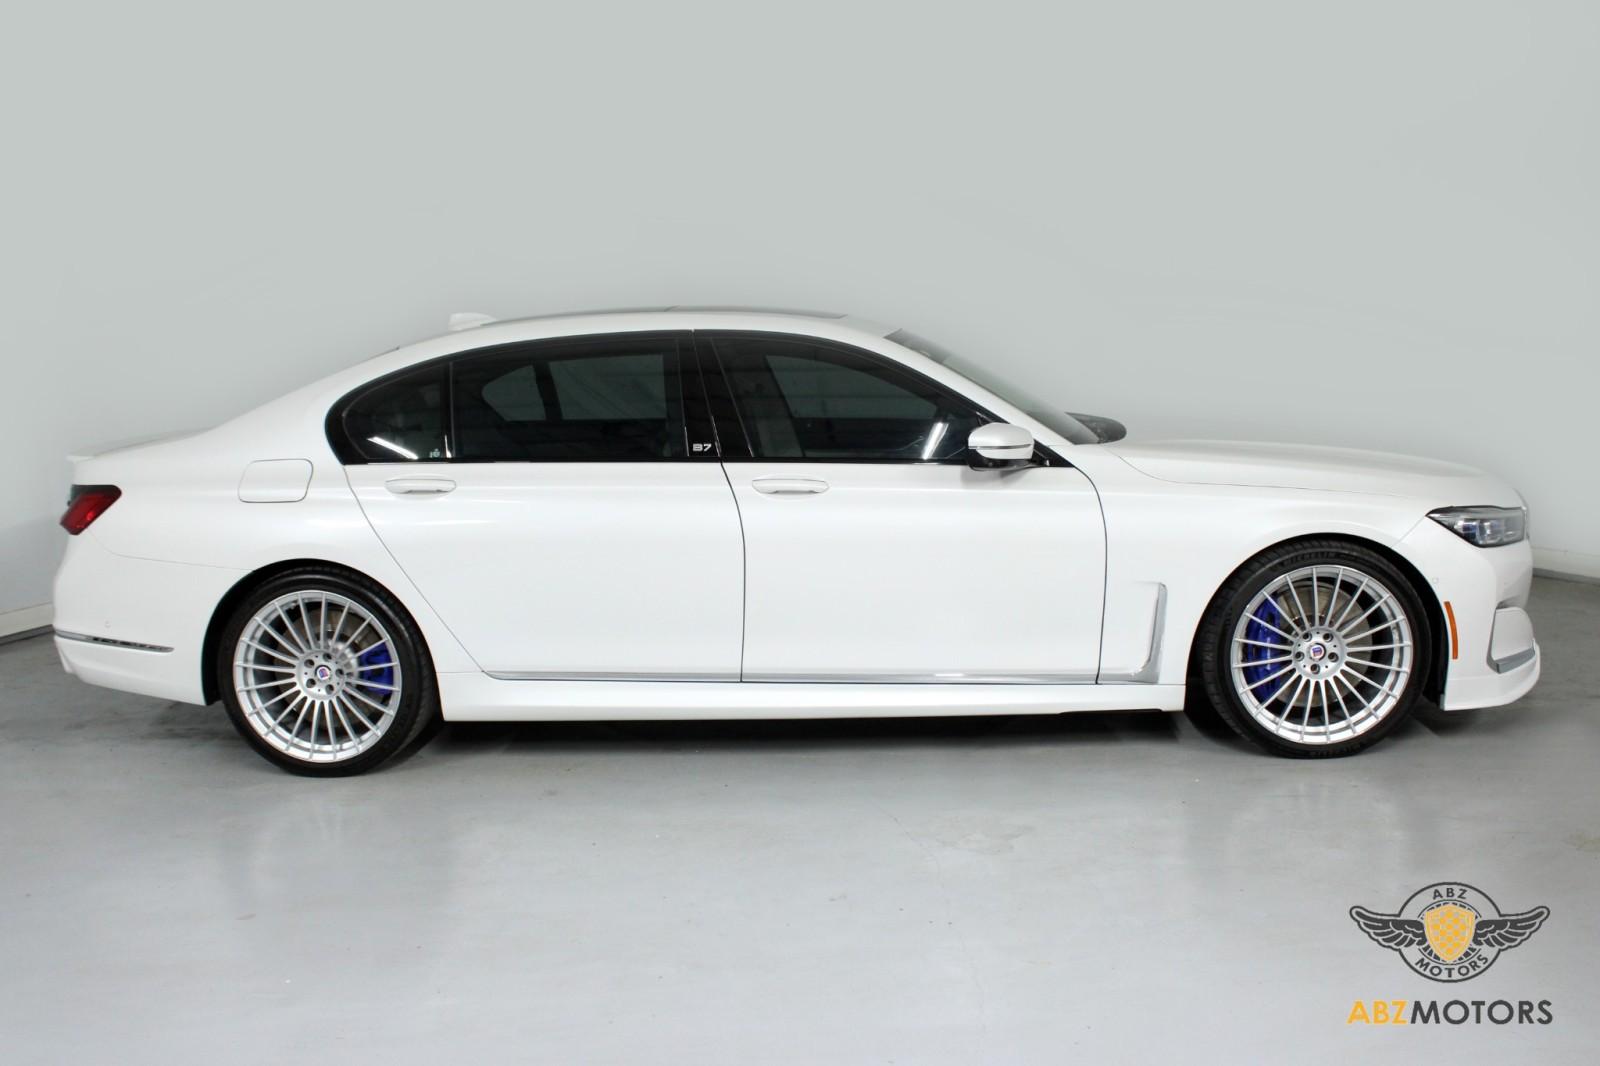 Used 2020 BMW 7 Series ALPINA B7 xDrive For Sale (Sold 